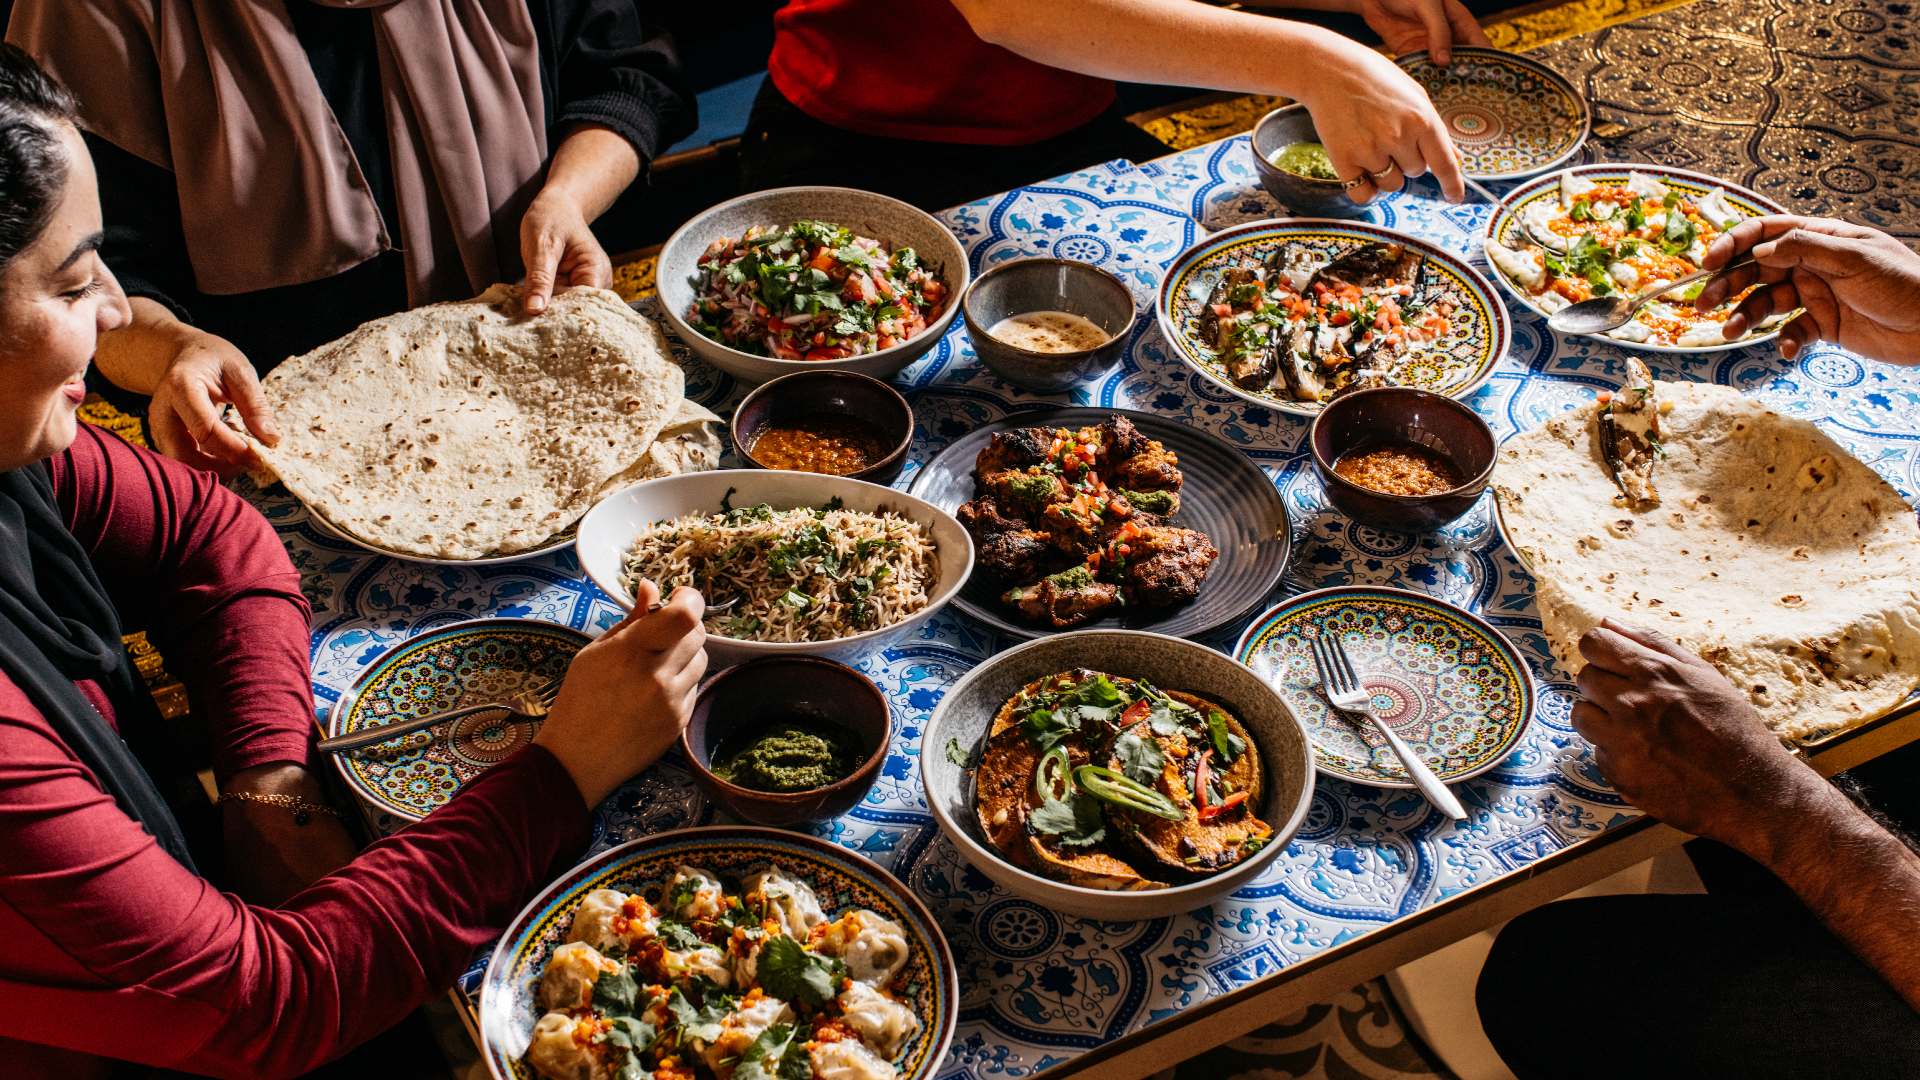 Kabul Social Is the CBD's New Afghan Takeaway Restaurant Serving Dumplings and Snack Packs for a Good Cause